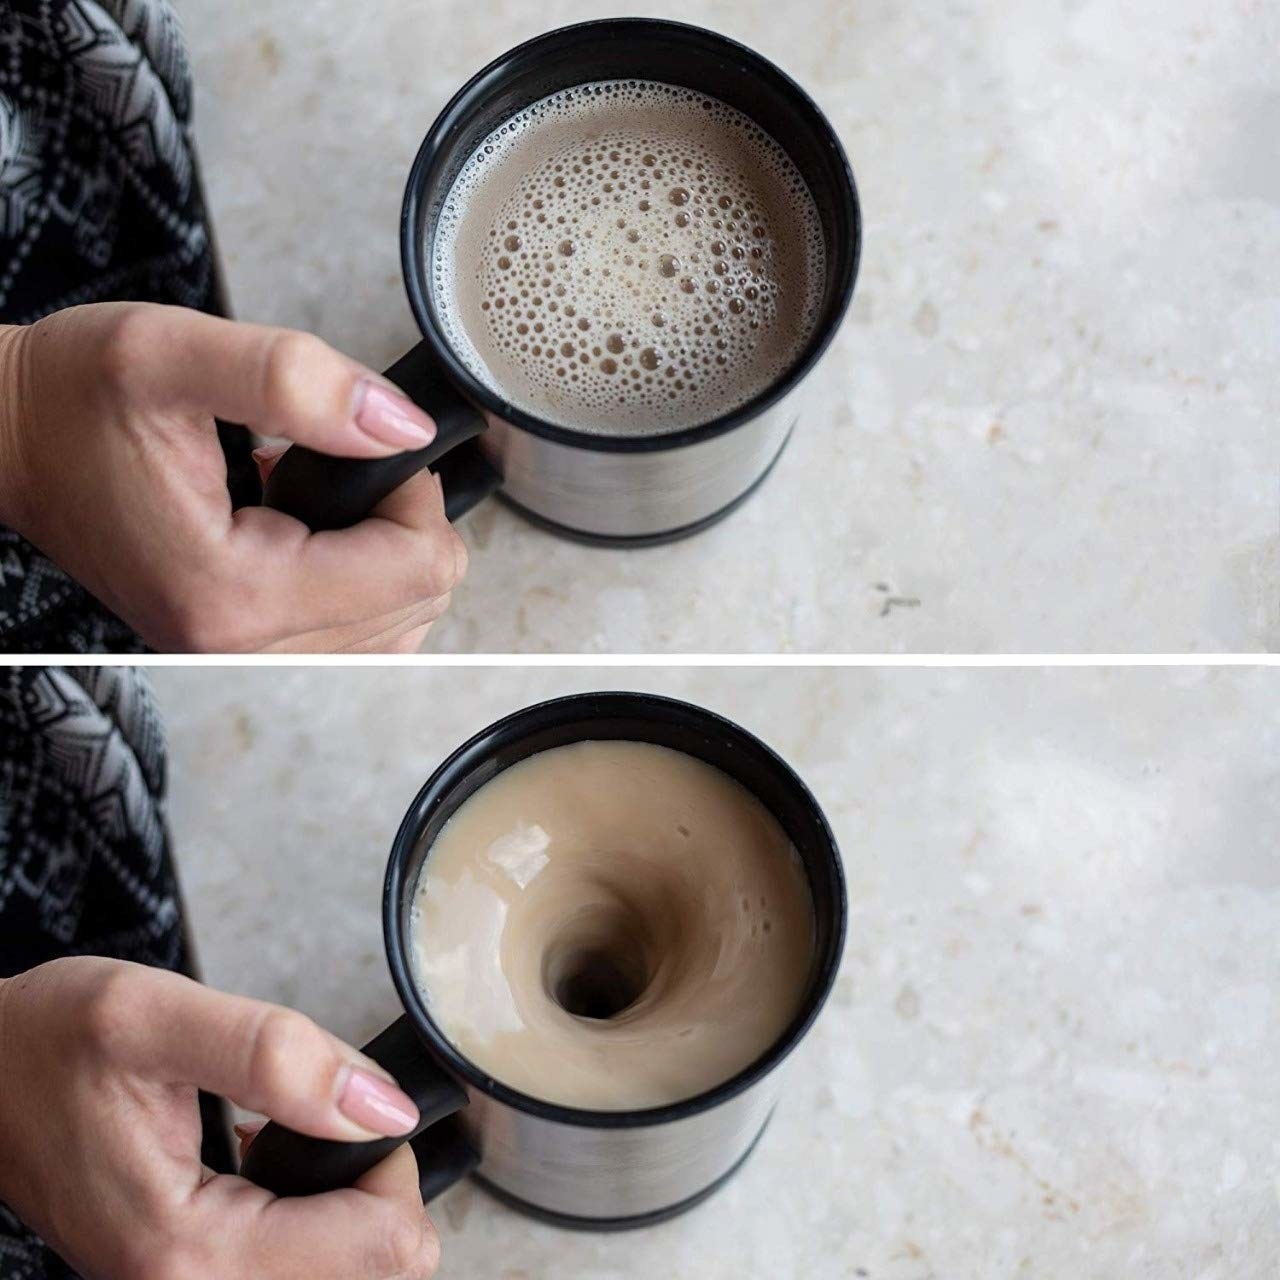 A before and after collage of a person holding a self-stirring mug of coffee turned off and on